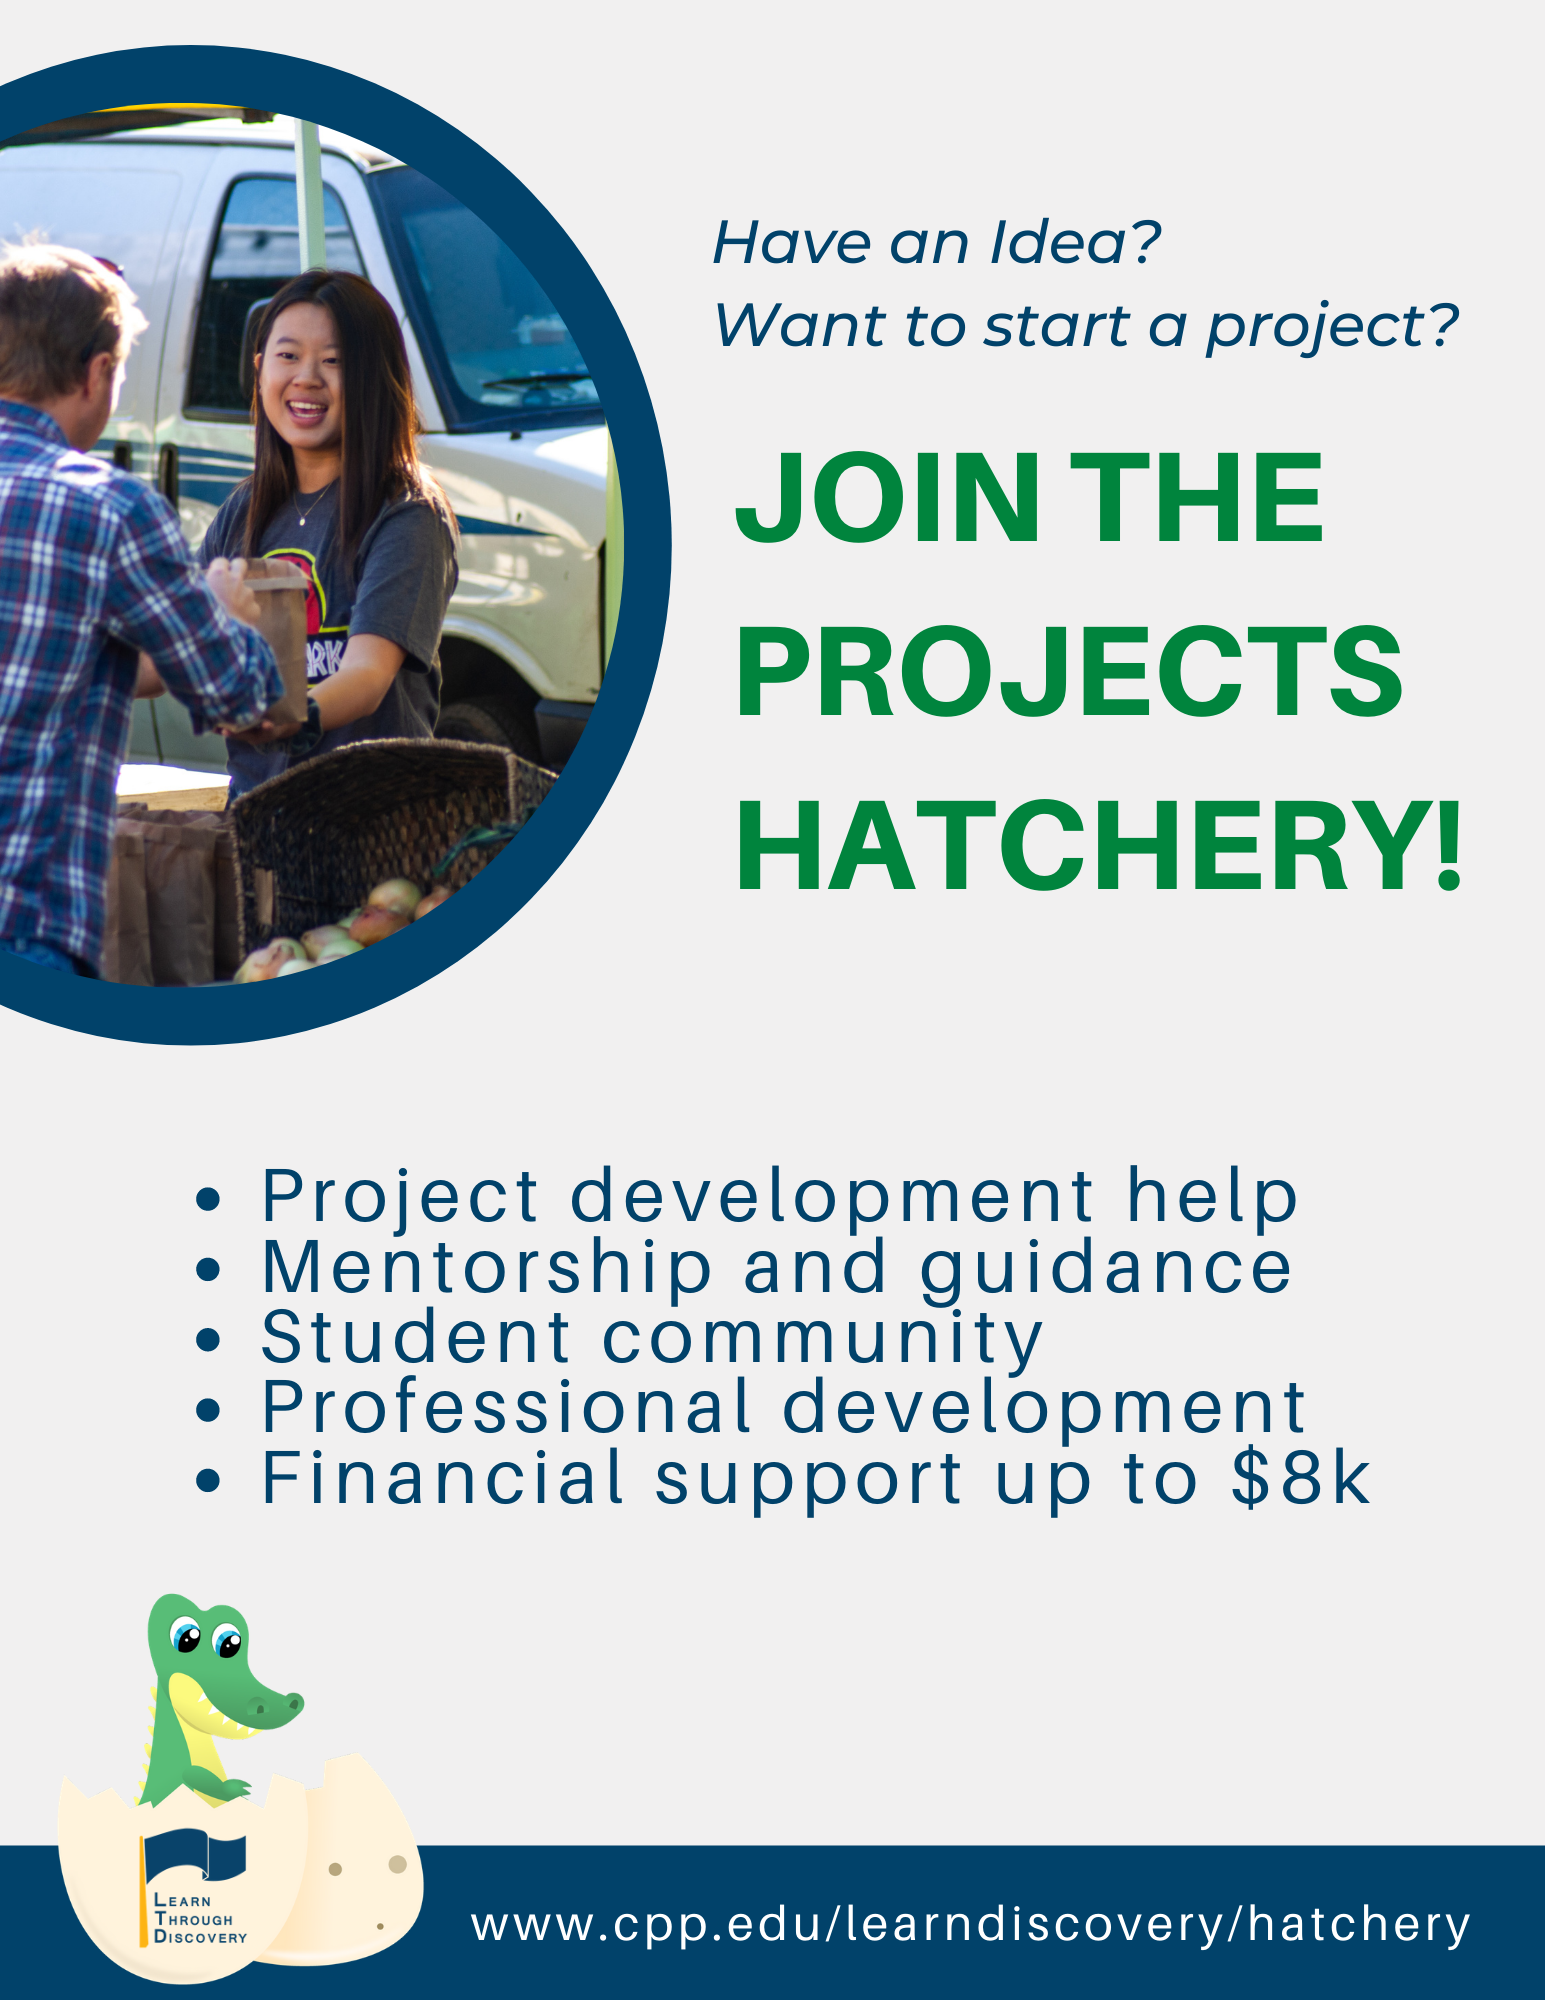 Text: Have an Idea? Want to start a project? Join the Projects Hatchery! Bullet points: Project development help, mentorship and guidance, student community, professional development, financial support up to $8k. Website URL: www.cpp.edu/learndiscovery/hatchery